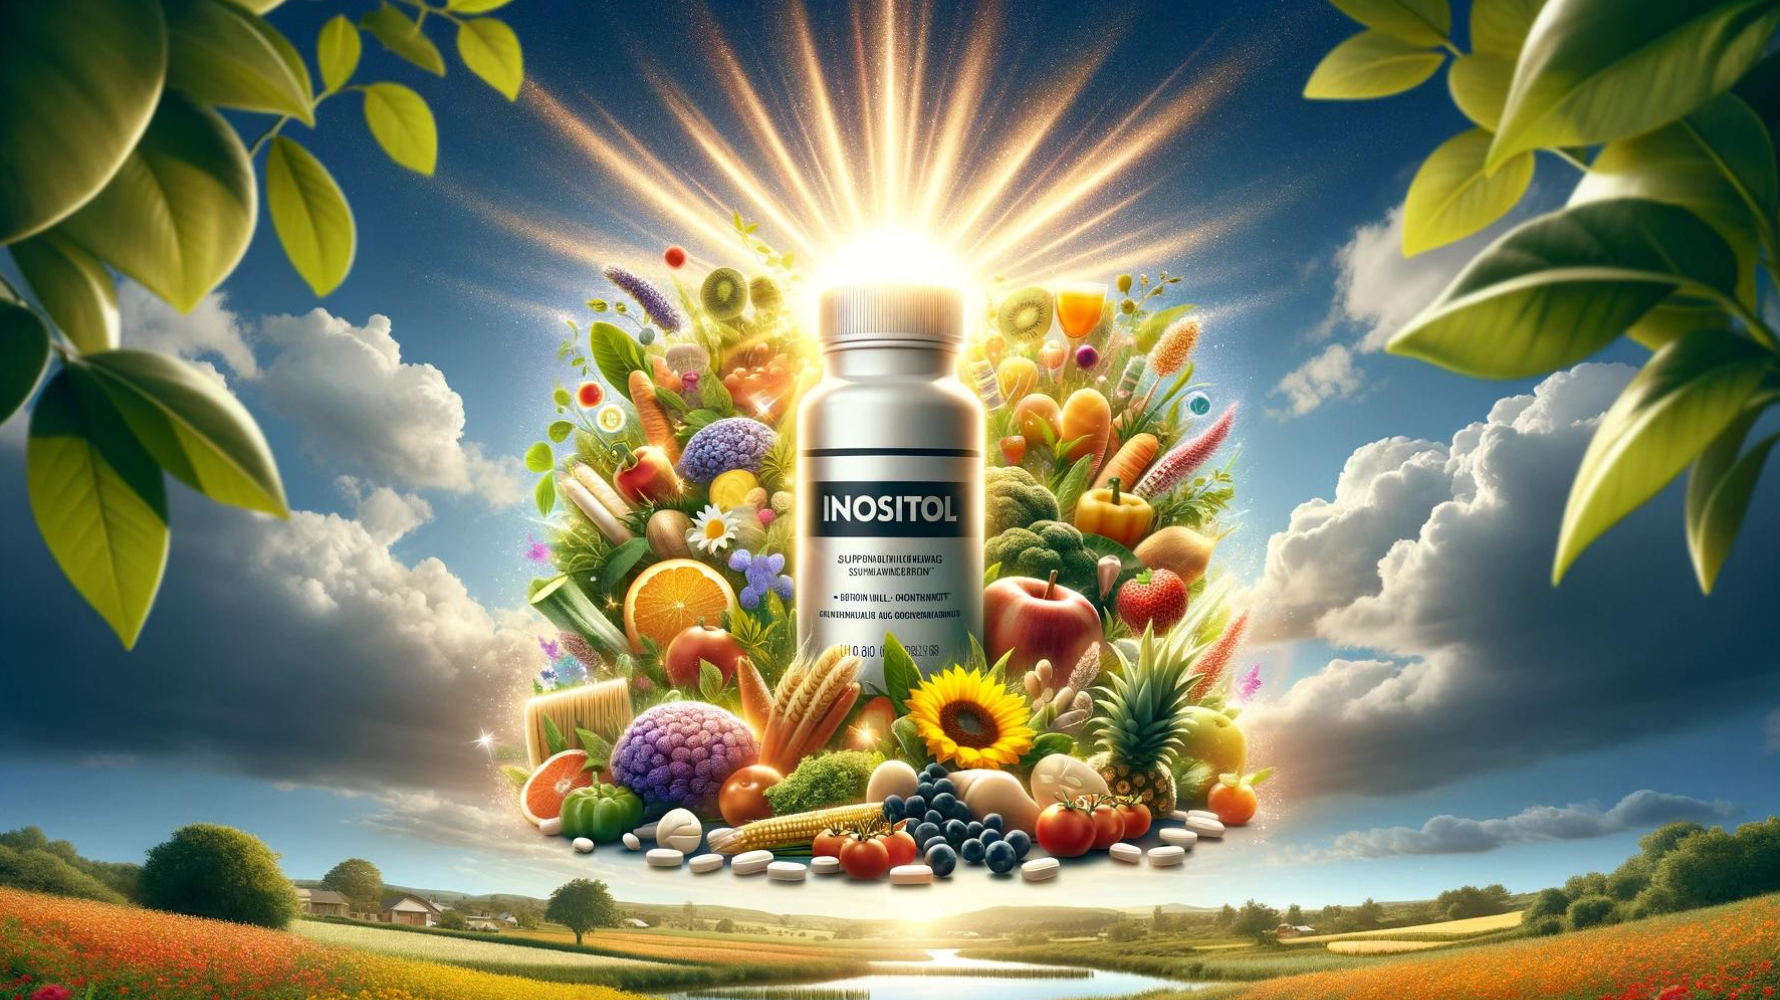 Inositol Explored: Beyond Traditional Views to Cutting-Edge Uses